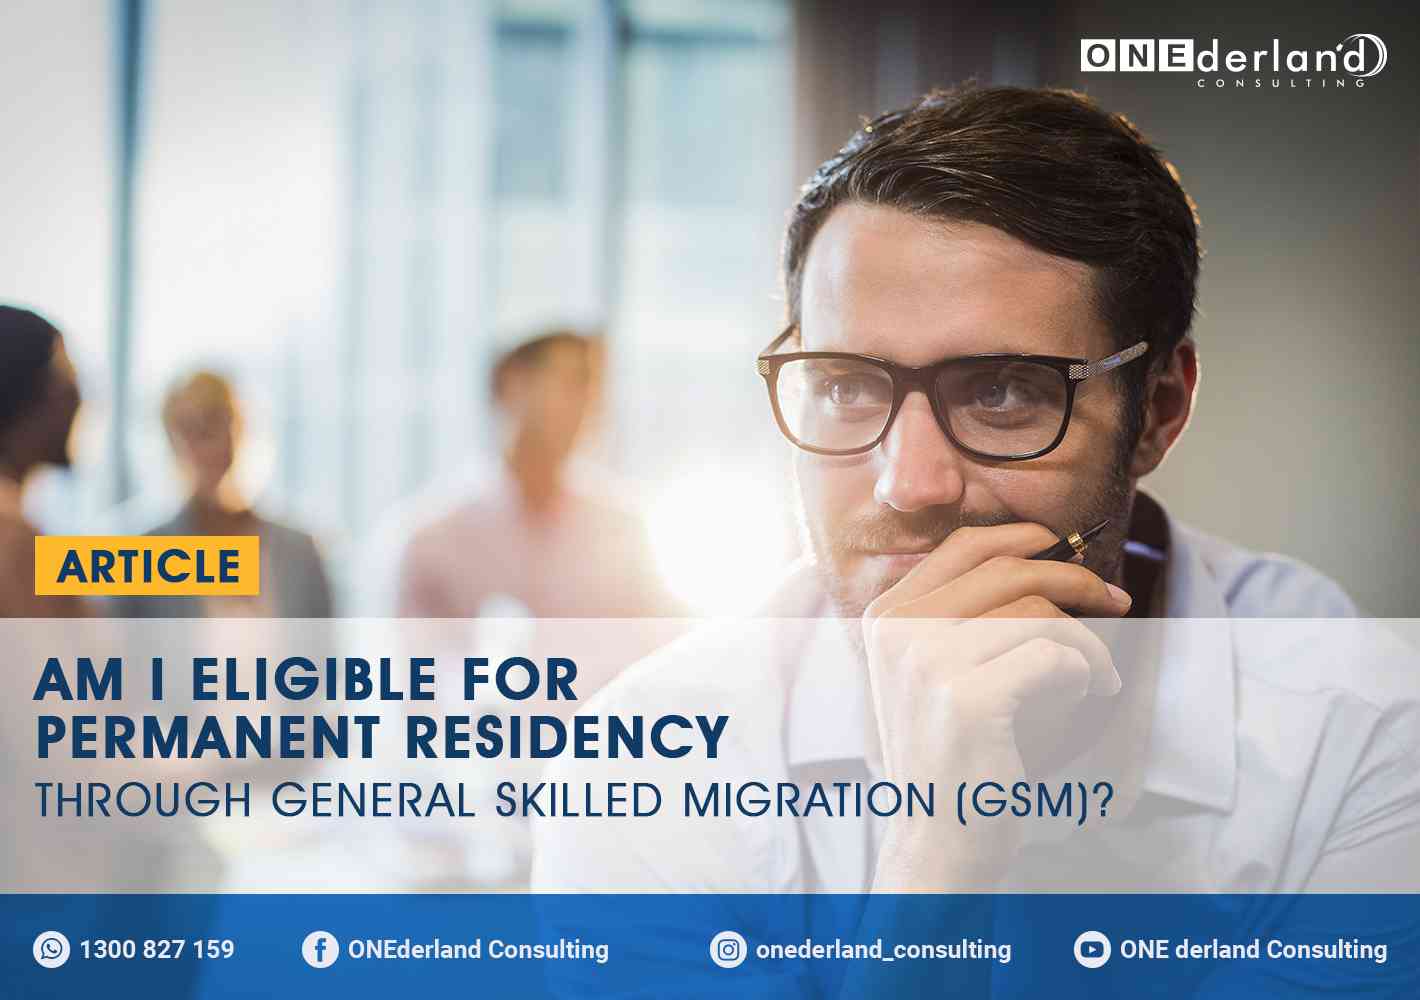 Am I Eligible For Permanent Residency Through General Skilled Migration (GSM)